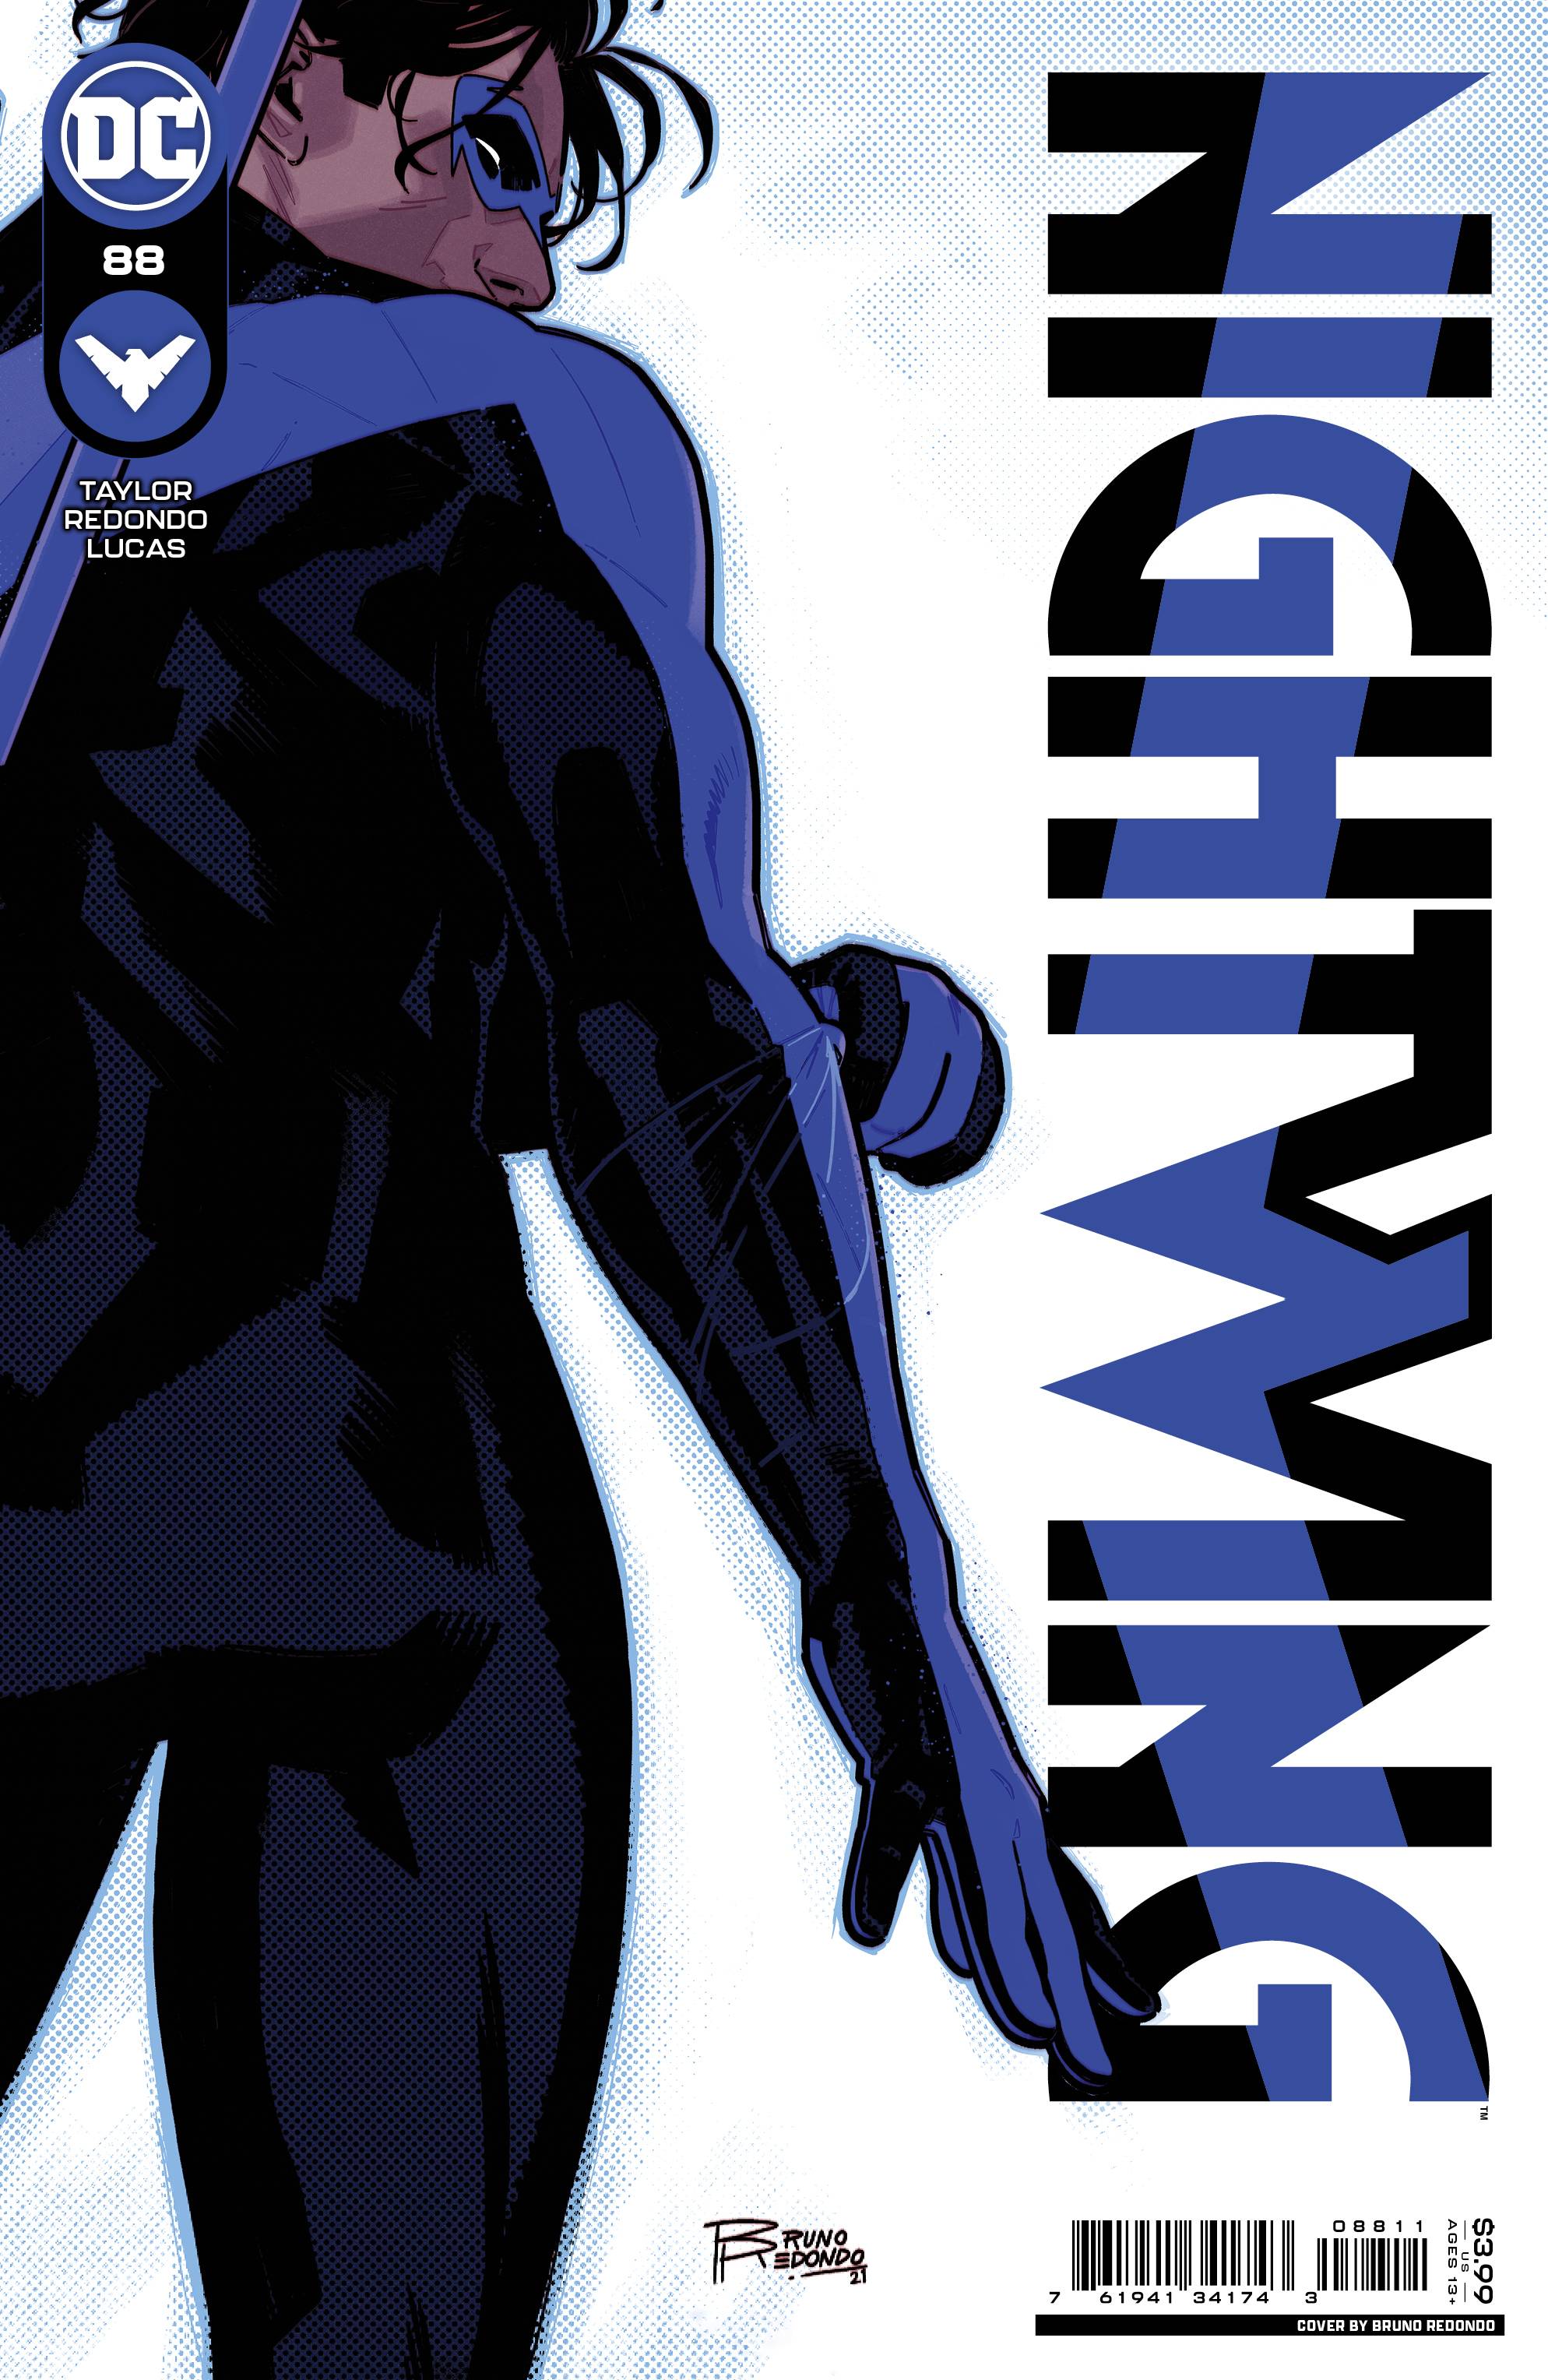 NIGHTWING #88 CVR A REDONDO | Game Master's Emporium (The New GME)